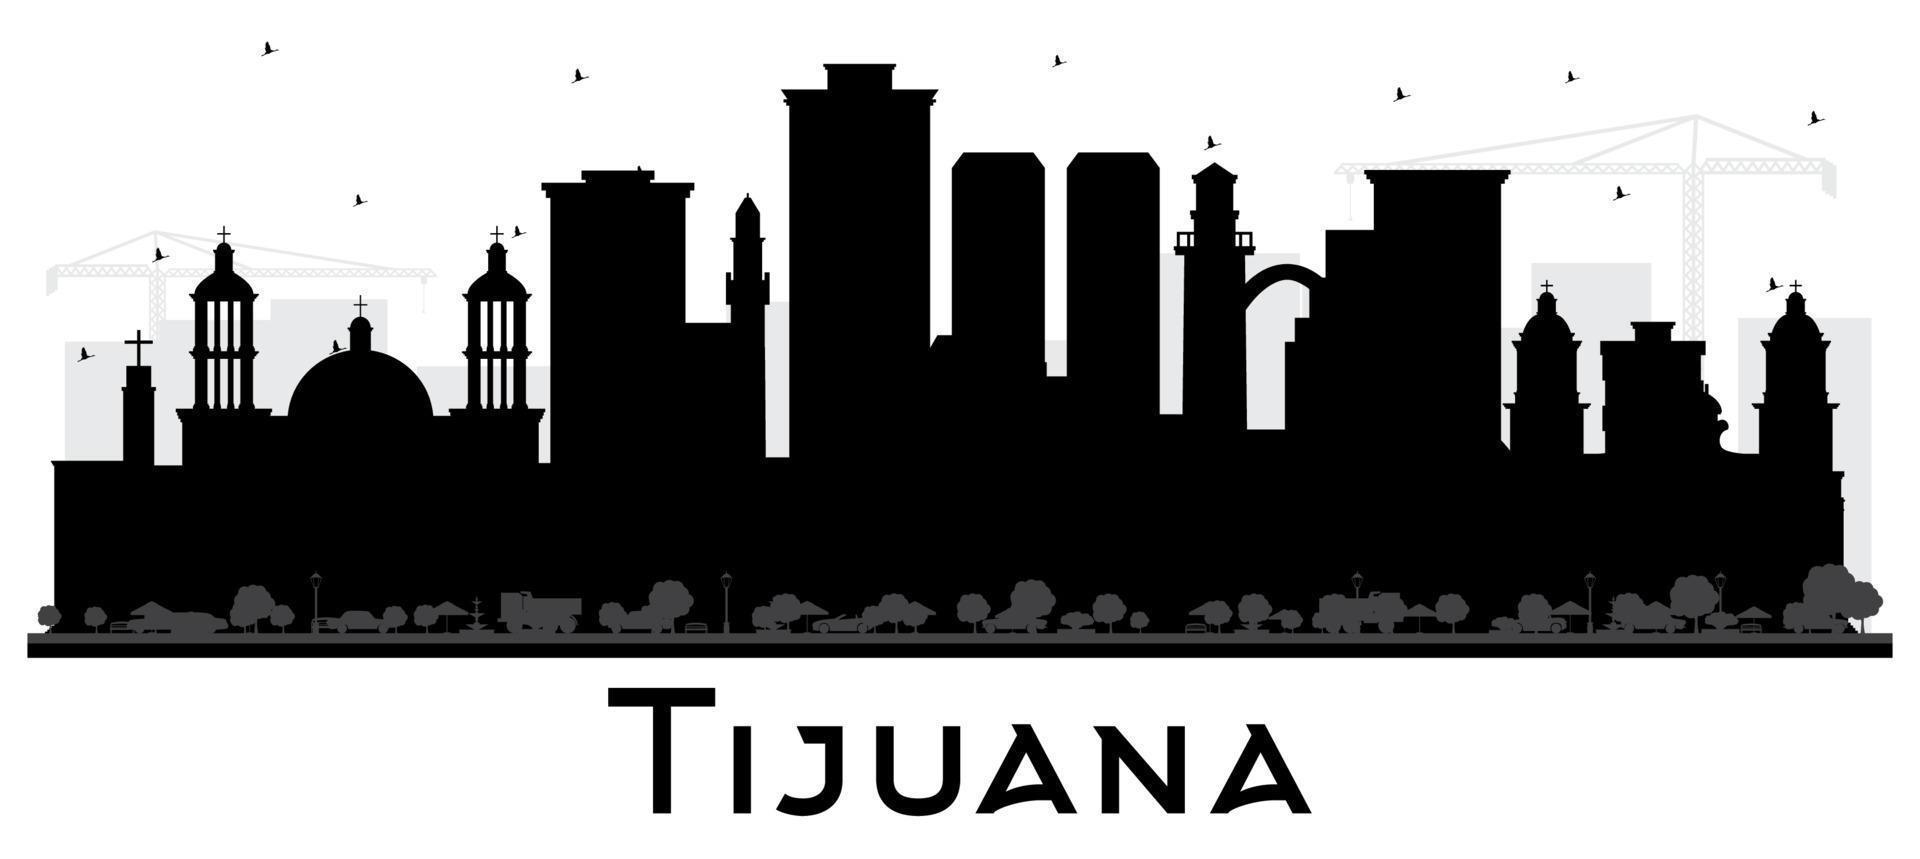 Tijuana Mexico City Skyline Silhouette with Black Buildings Isolated on White. vector